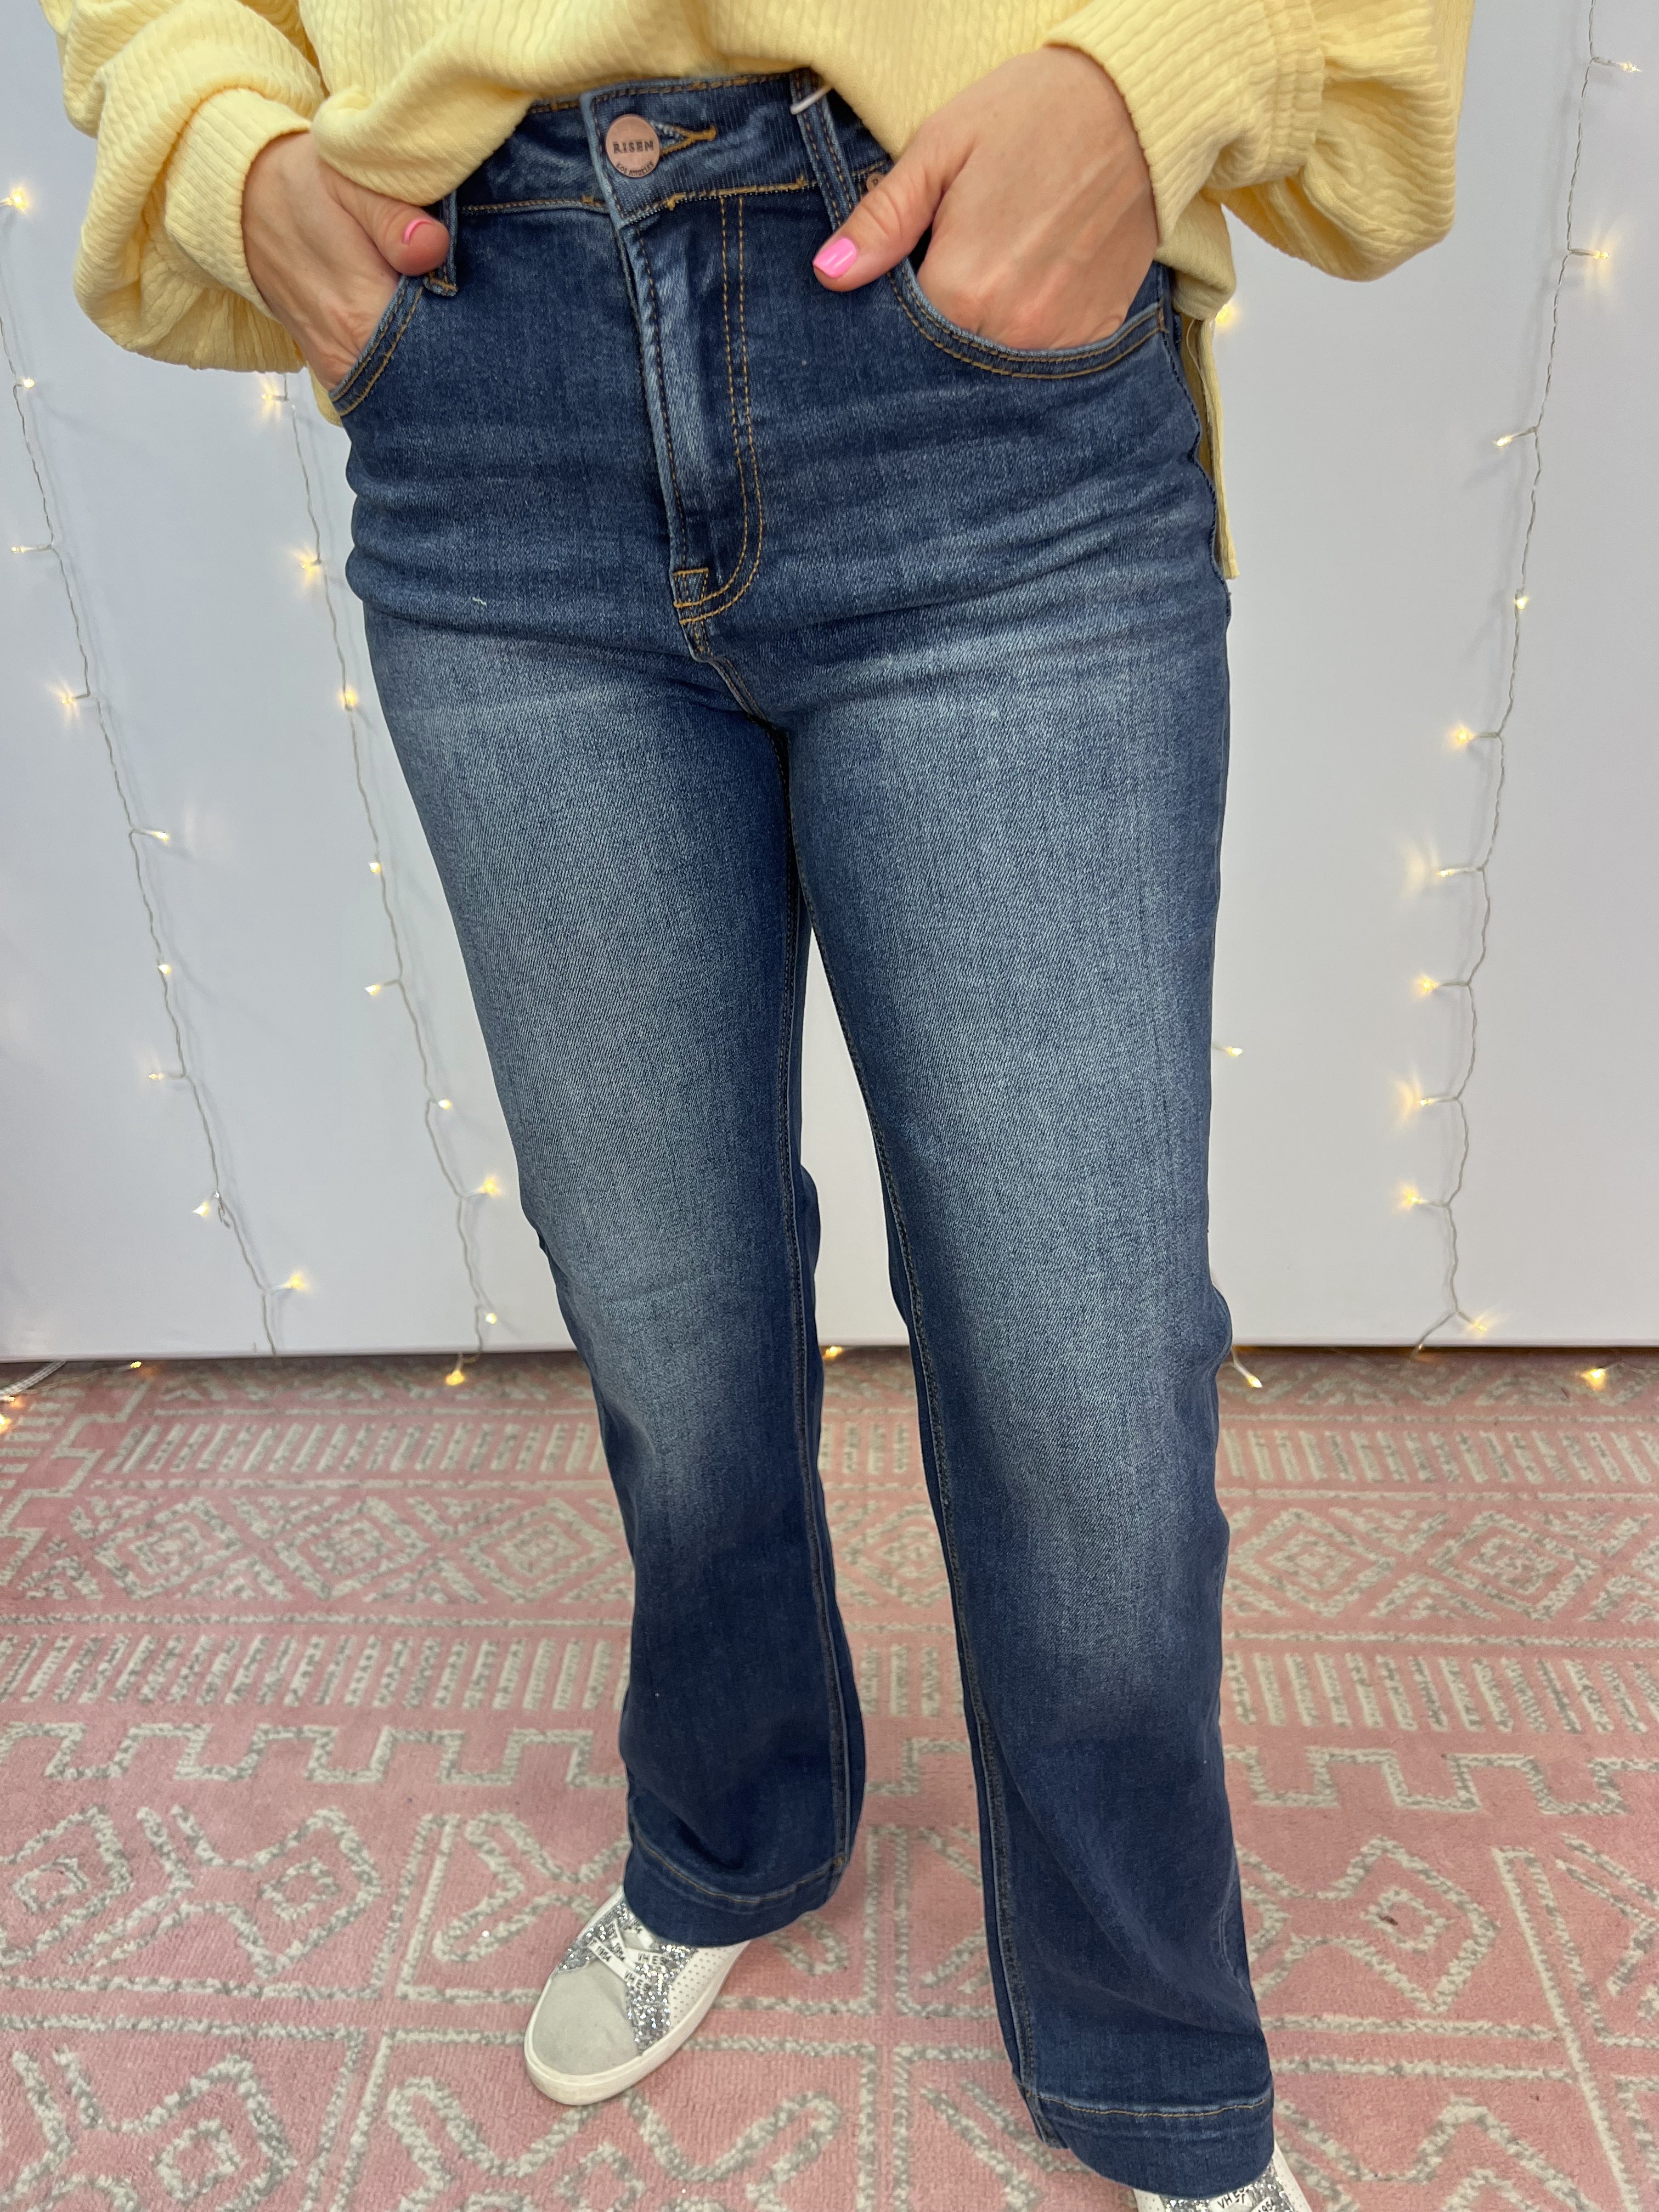 RISEN - High Rise Bootcut Dark Wash-Jeans-Risen-The Lovely Closet, Women's Fashion Boutique in Alexandria, KY